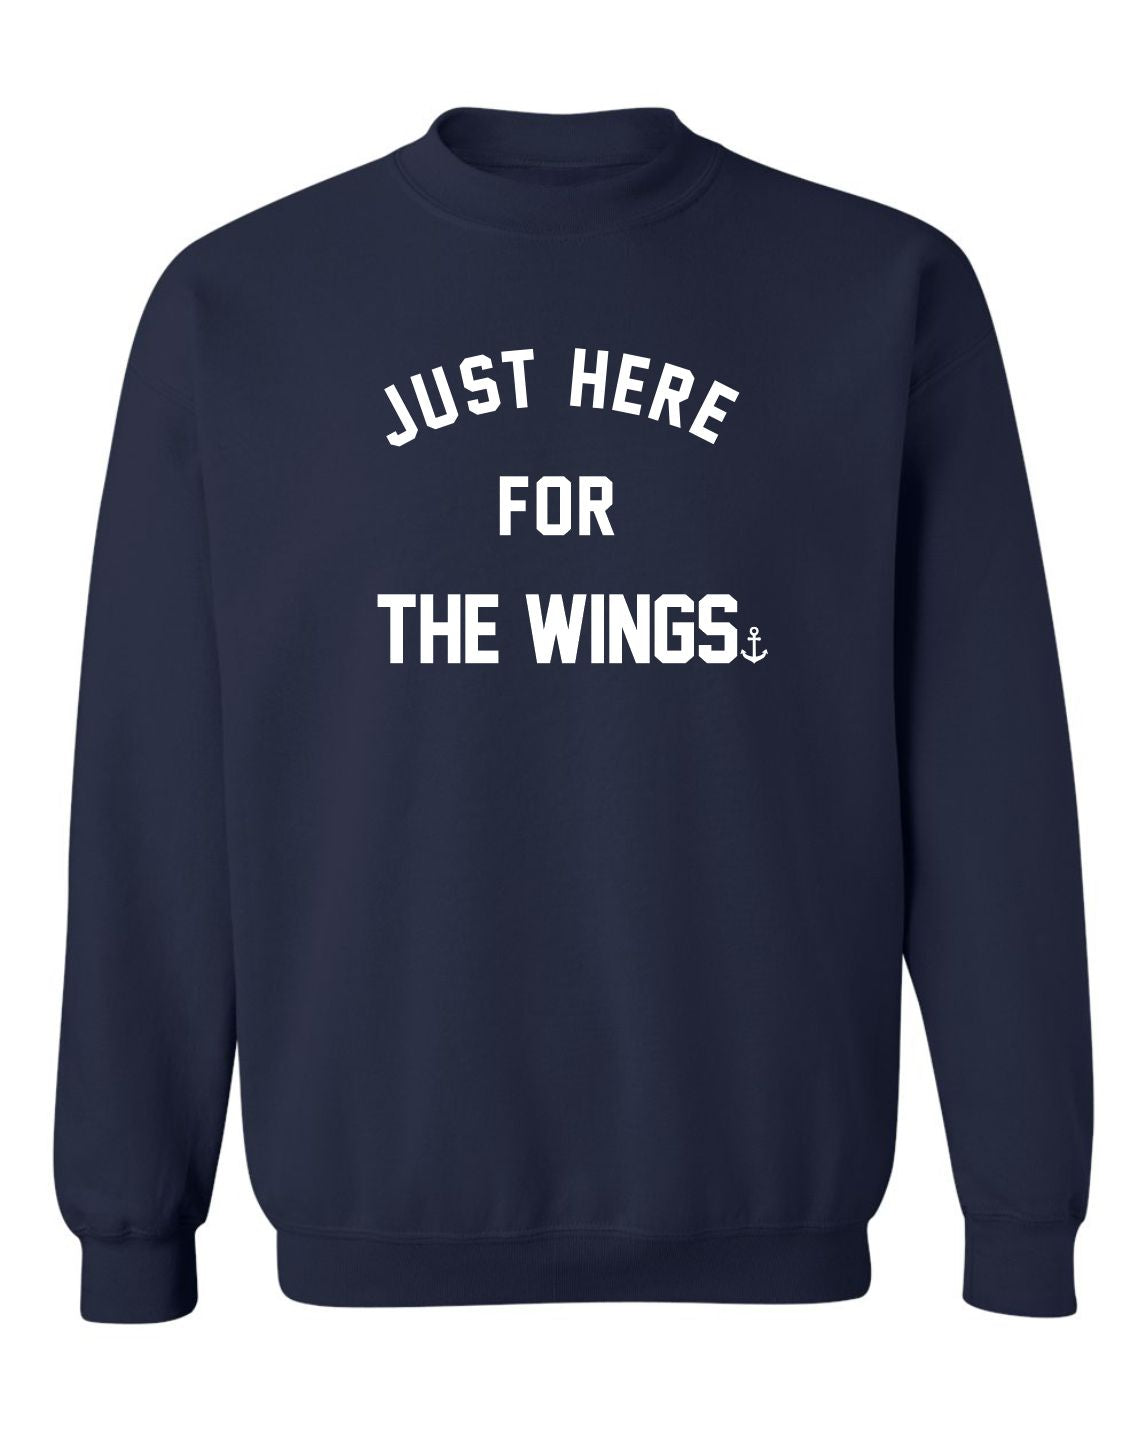 "Just Here For The Wings" Unisex Crewneck Sweatshirt